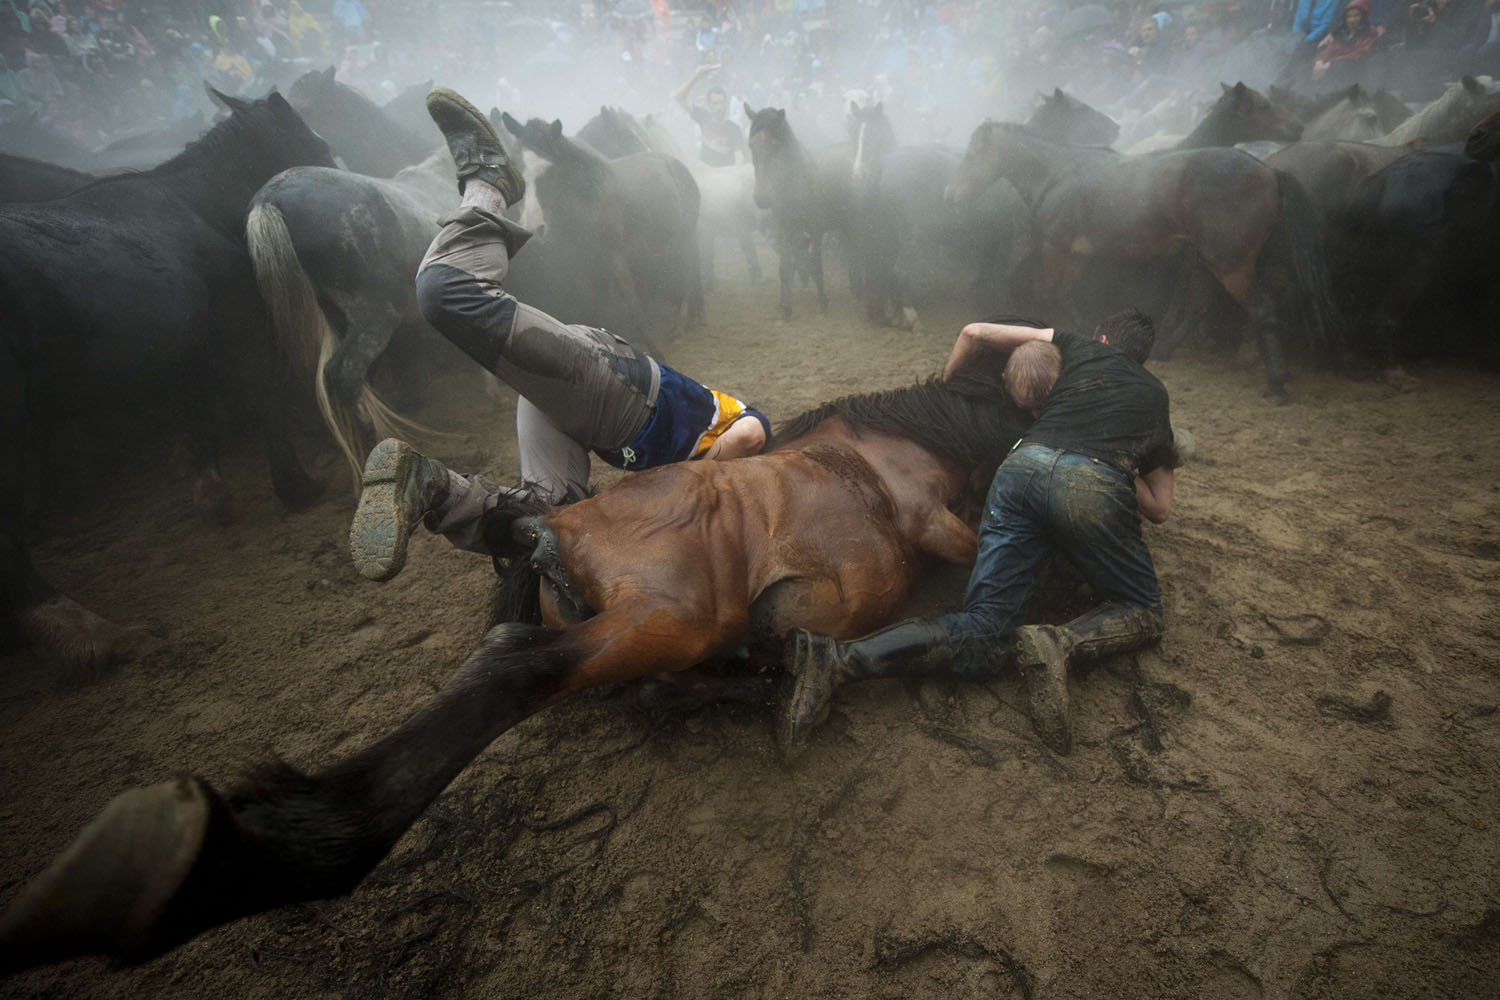 Jul. 5, 2014.  Aloitadores  (fighters) struggle with a wild horse during the  Rapa Das Bestas  (Shearing of the Beasts) traditional event in the Spanish northwestern village of Sabucedo, some 40 kms from Santiago de Compostela.